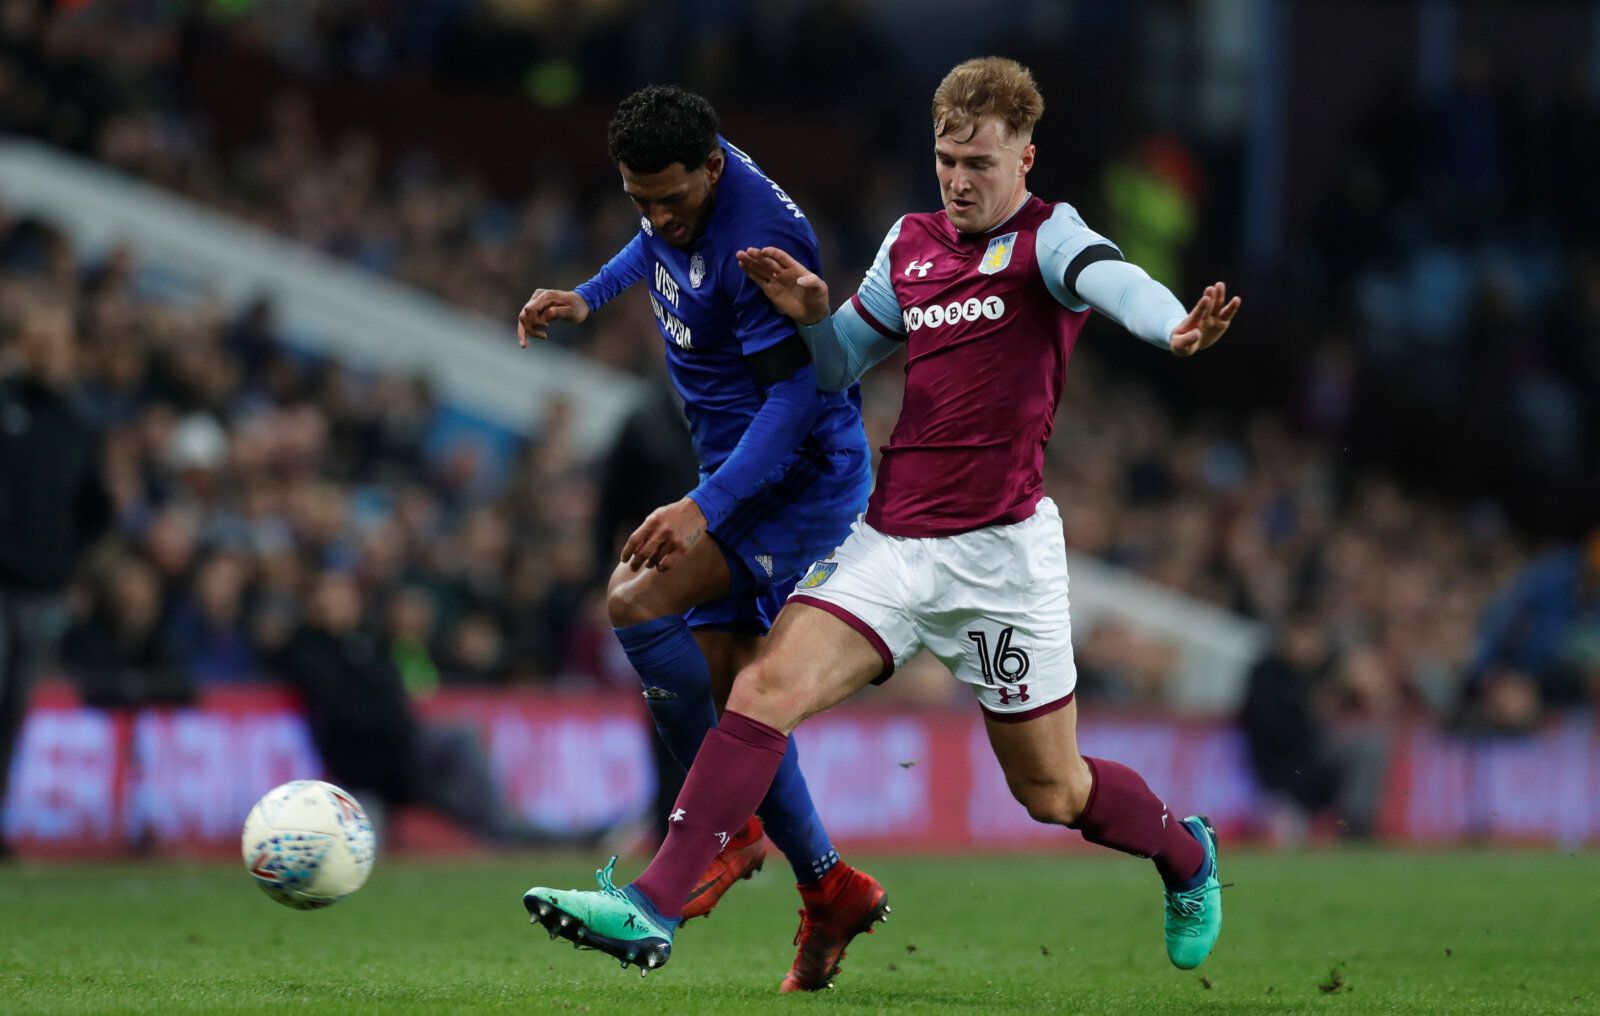 Soccer Football - Championship - Aston Villa vs Cardiff City - Villa Park, Birmingham, Britain - April 10, 2018   Cardiff City's Nathaniel Mendez-Laing in action with Aston Villa's James Bree   Action Images/Andrew Couldridge    EDITORIAL USE ONLY. No use with unauthorized audio, video, data, fixture lists, club/league logos or 